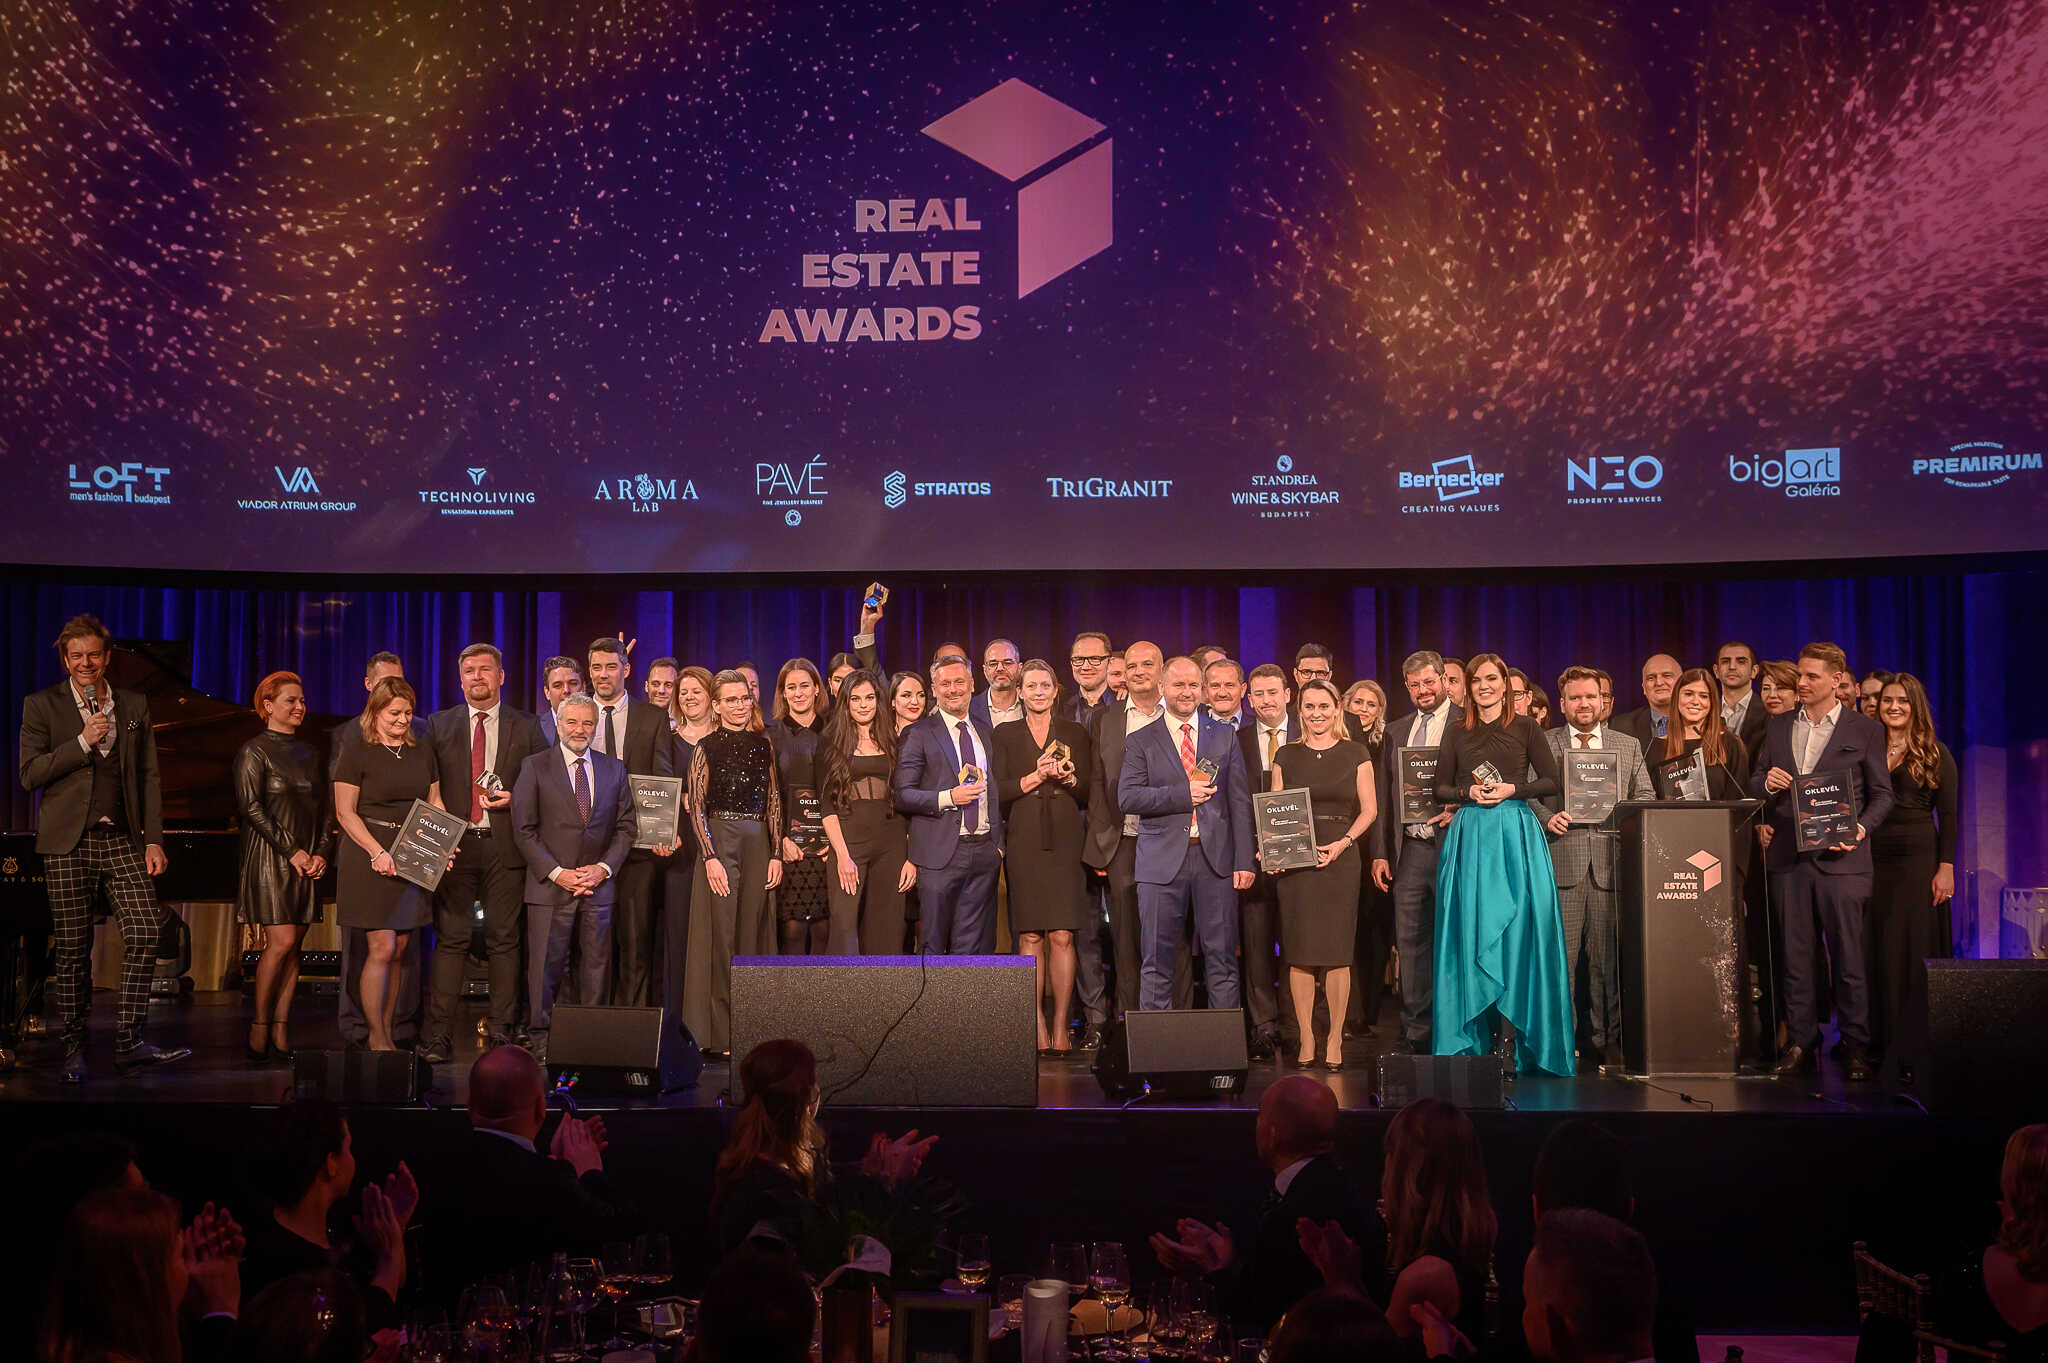 WING ranked first in 2 categories at this year’s Real Estate Awards